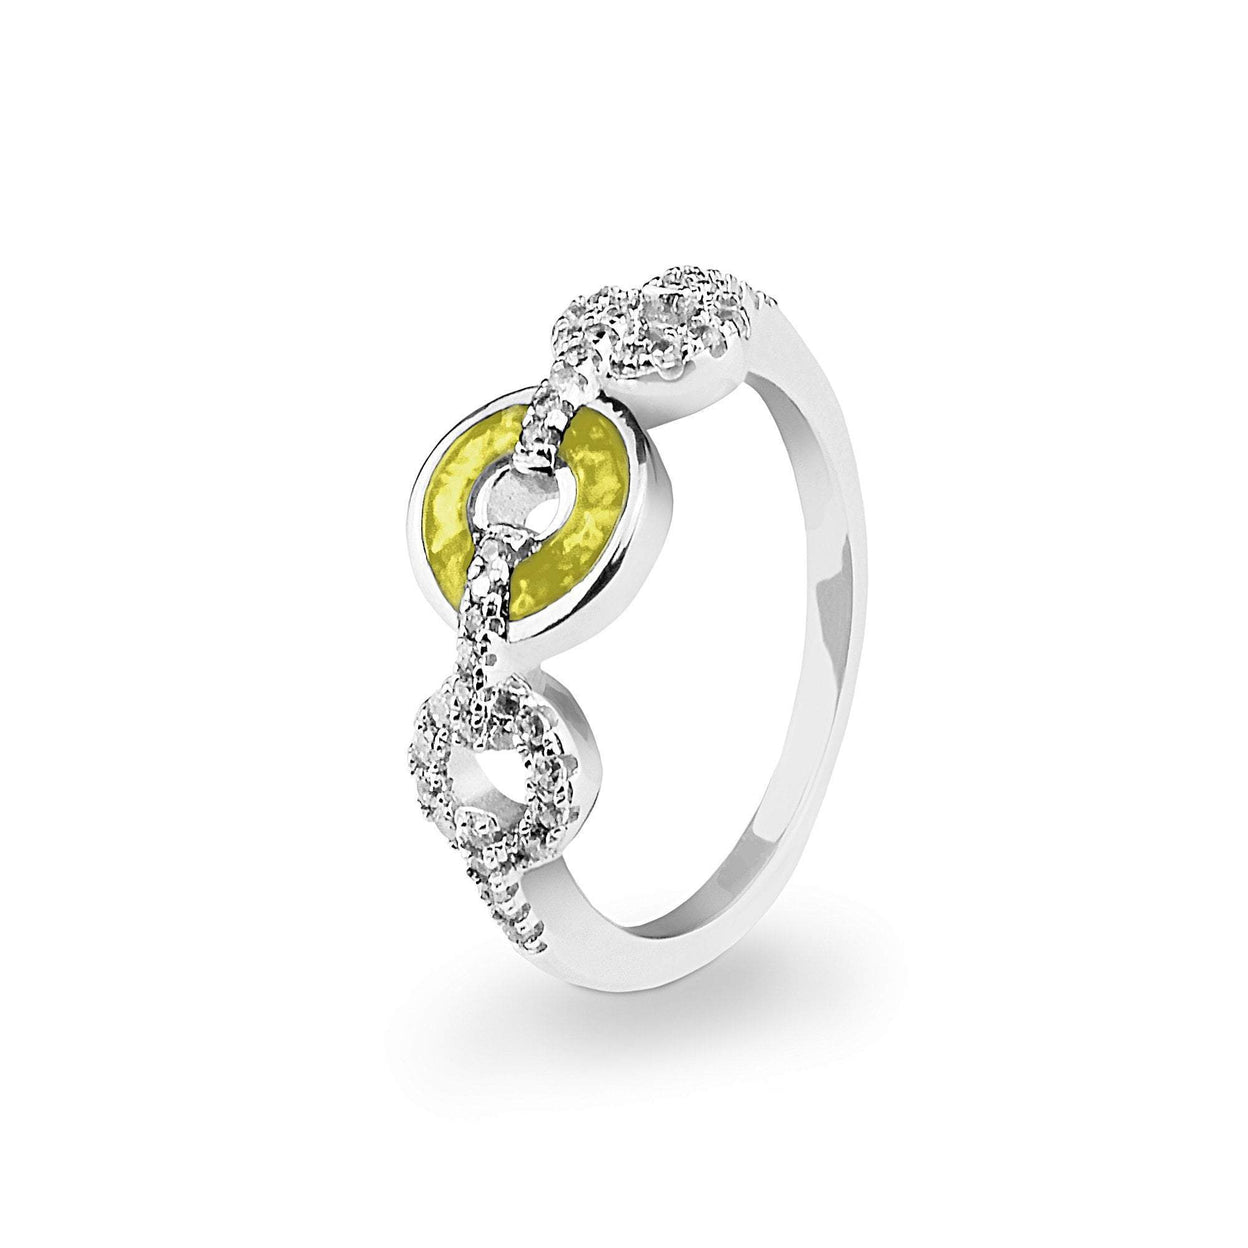 Load image into Gallery viewer, EverWith™ Ladies Tranquility Memorial Ashes Ring with Swarovski Crystals - EverWith Memorial Jewellery - Trade